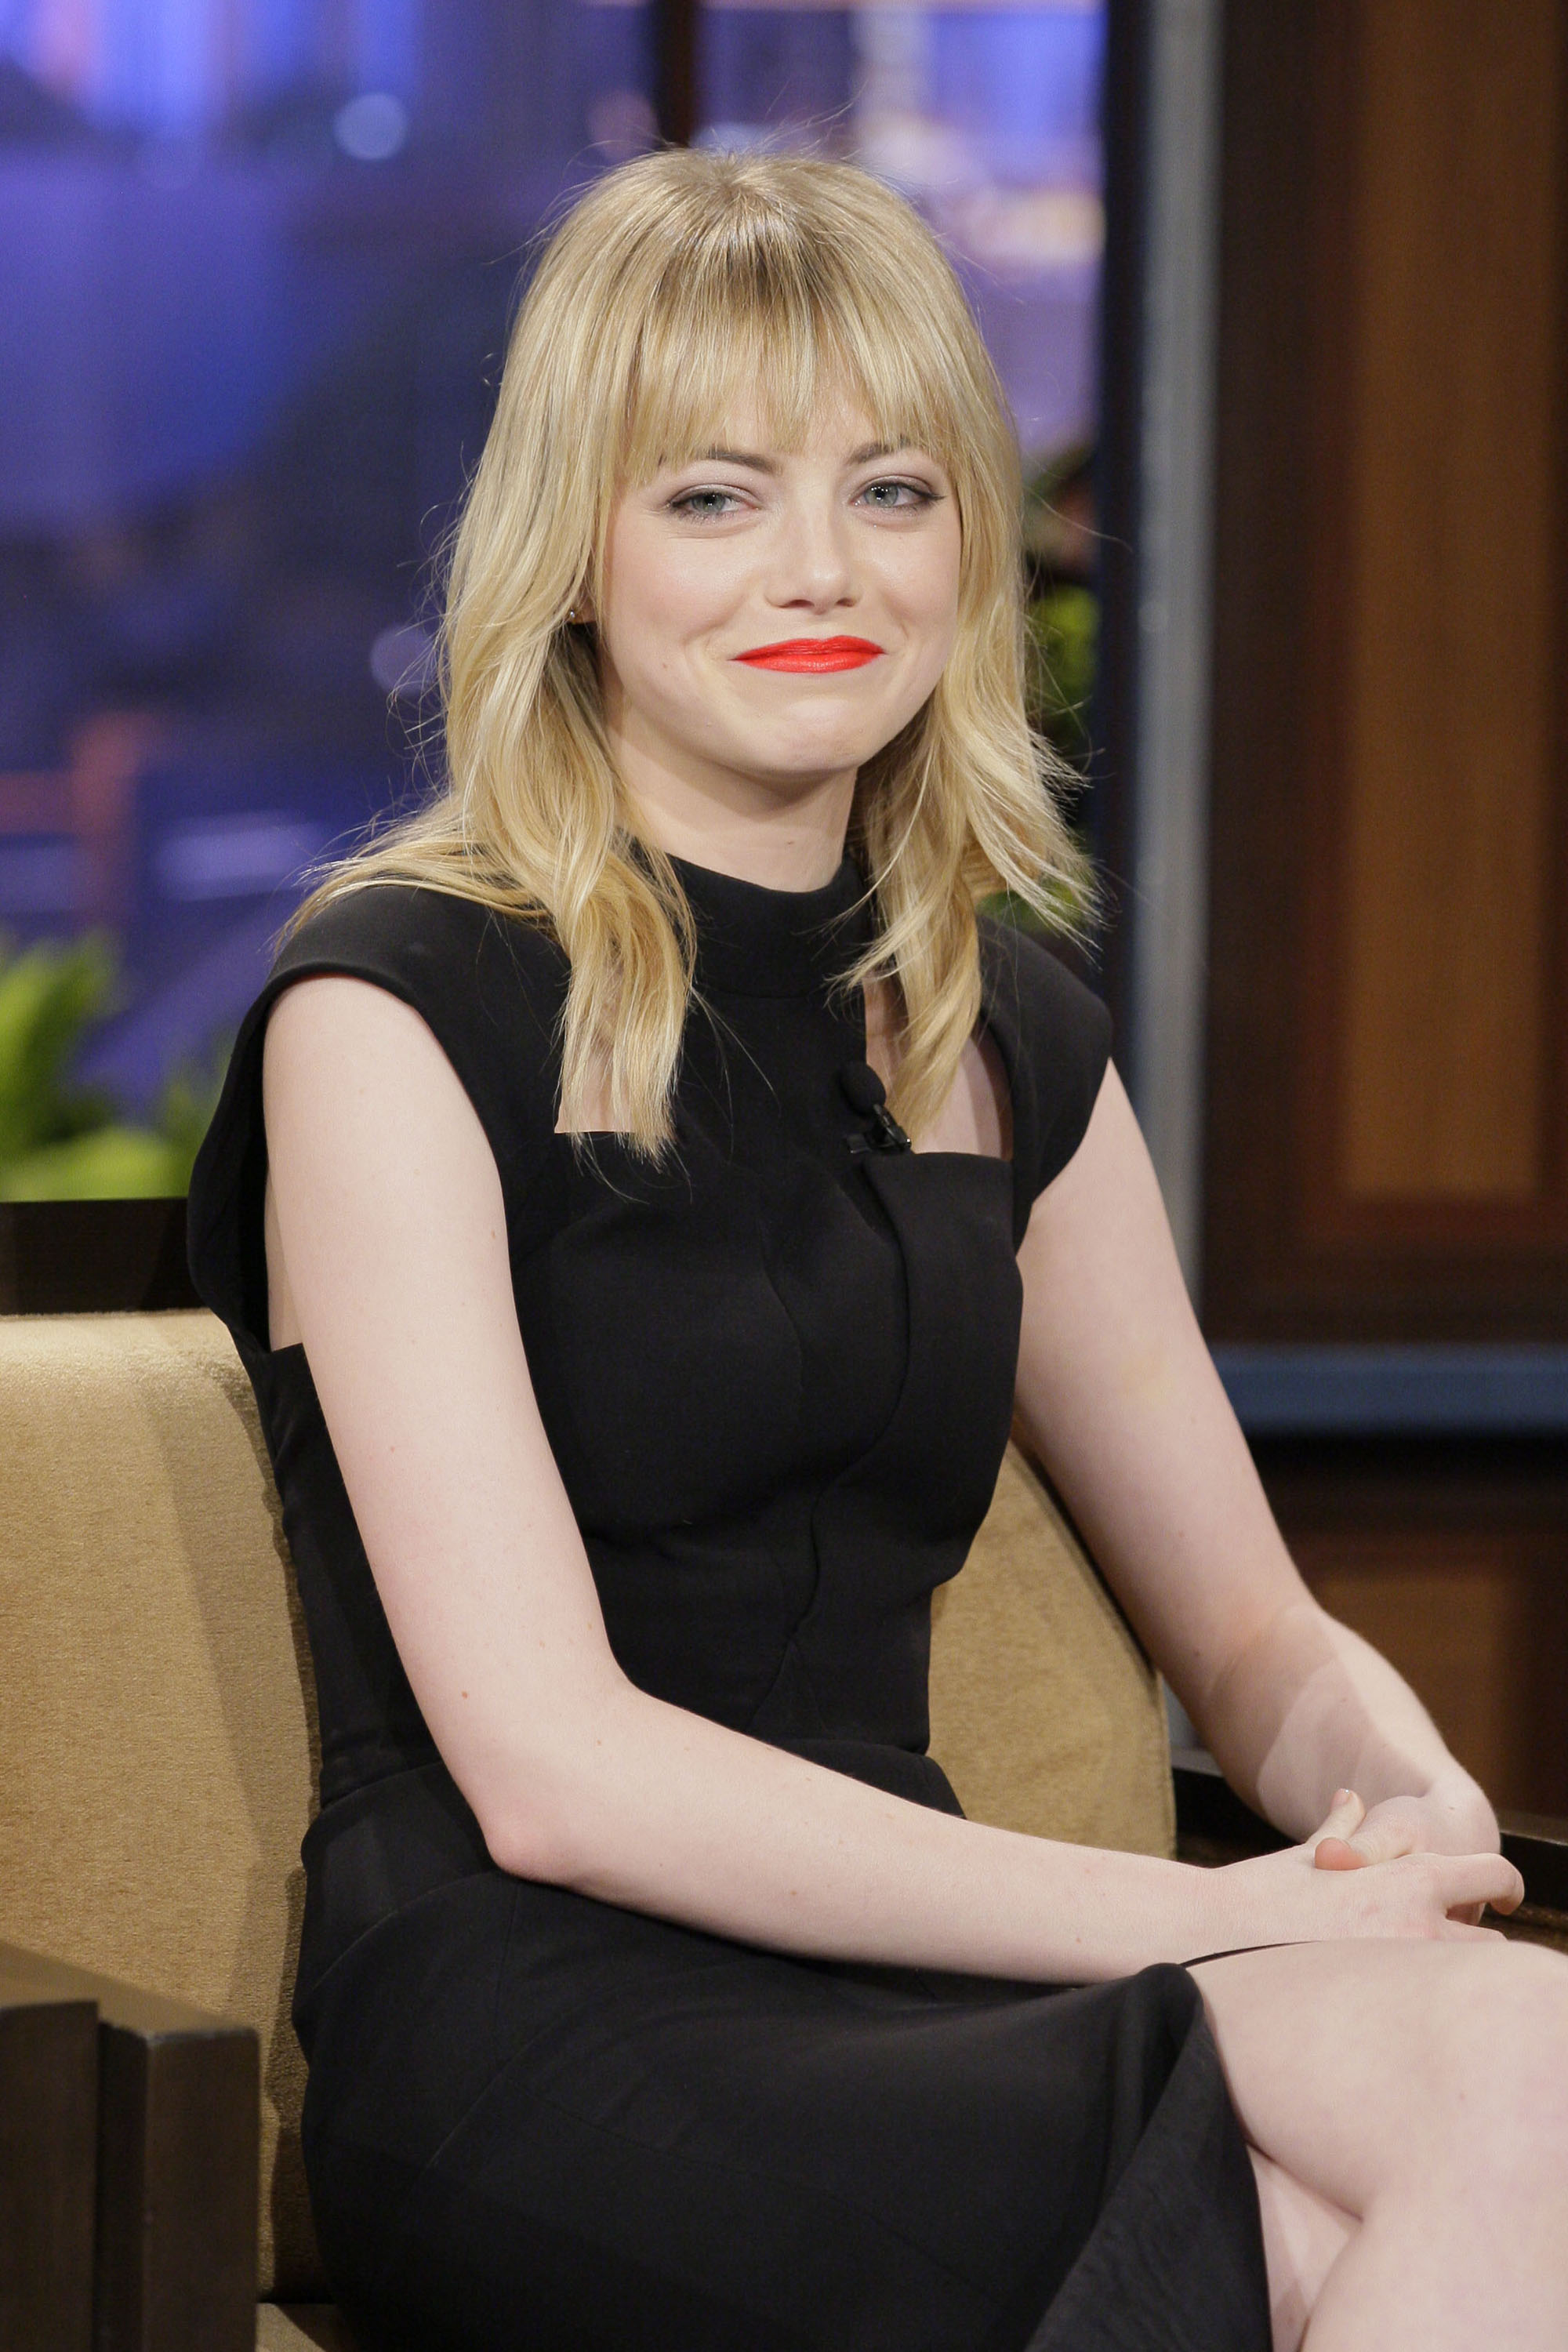 Emma Stone during an interview on January 8, 2013 | Source: Getty Images